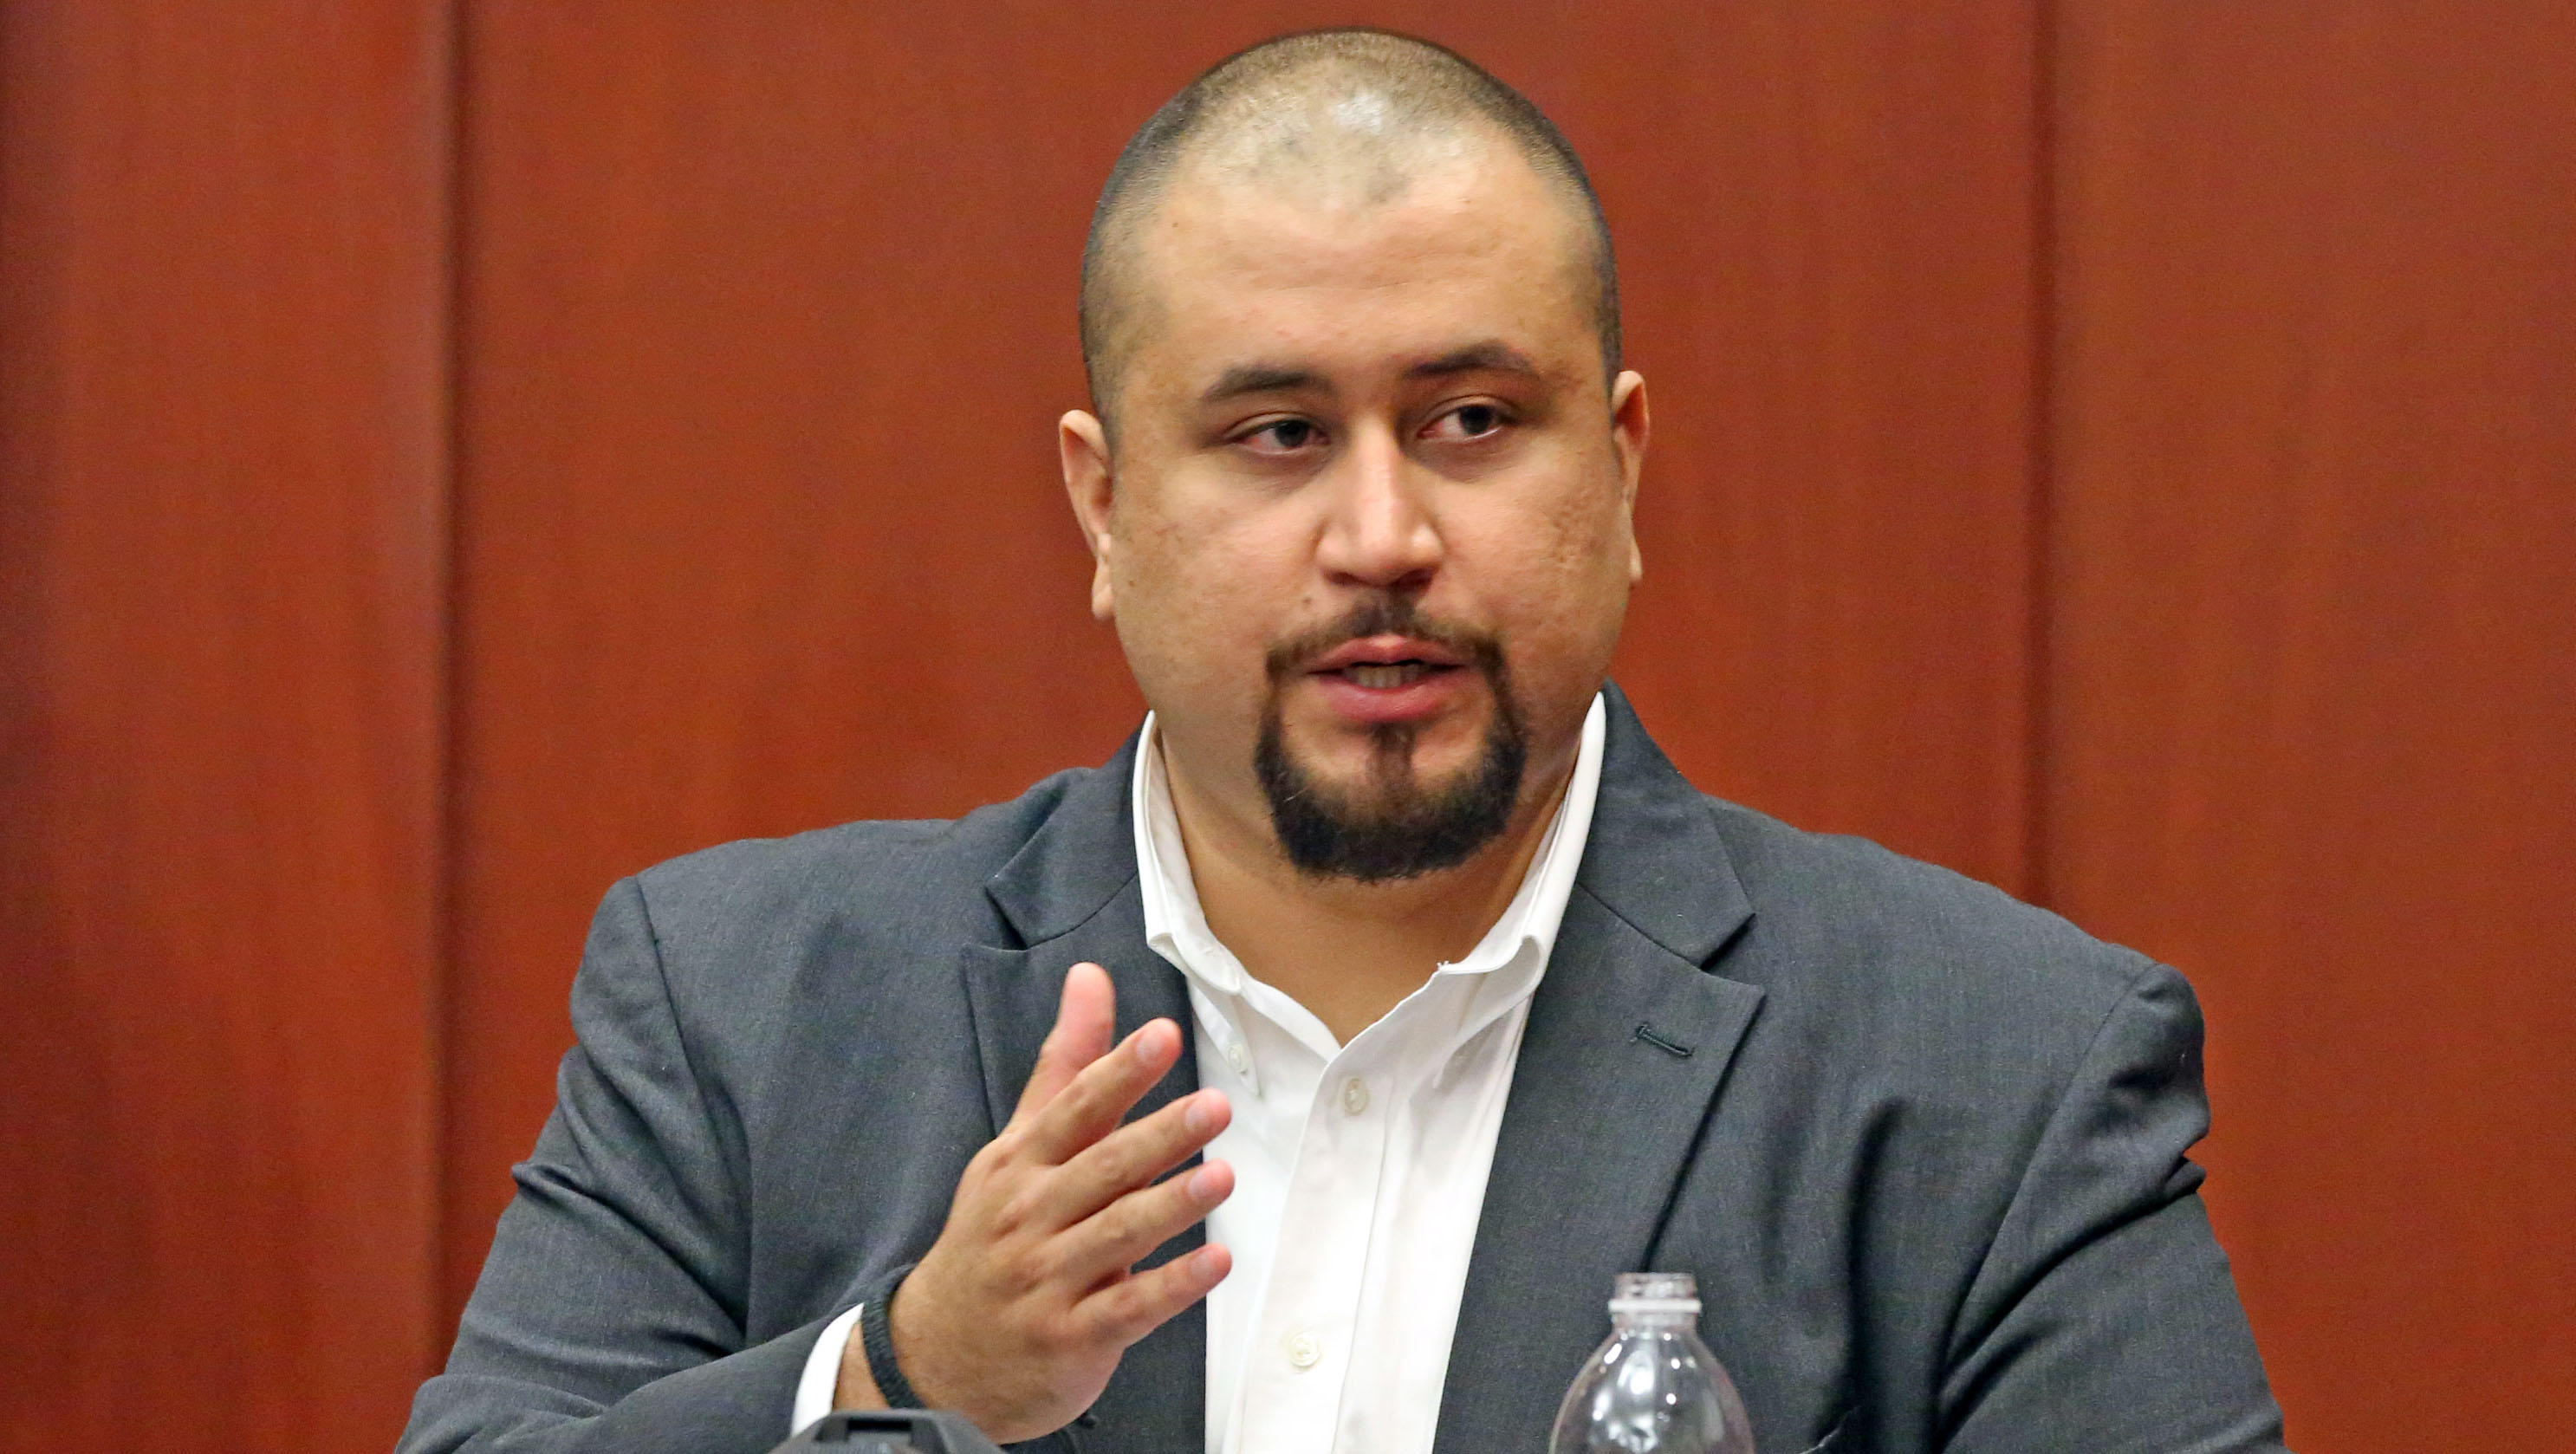 George Zimmerman testifies Matthew Apperson shot at him in on-road confrontation - CBS ...